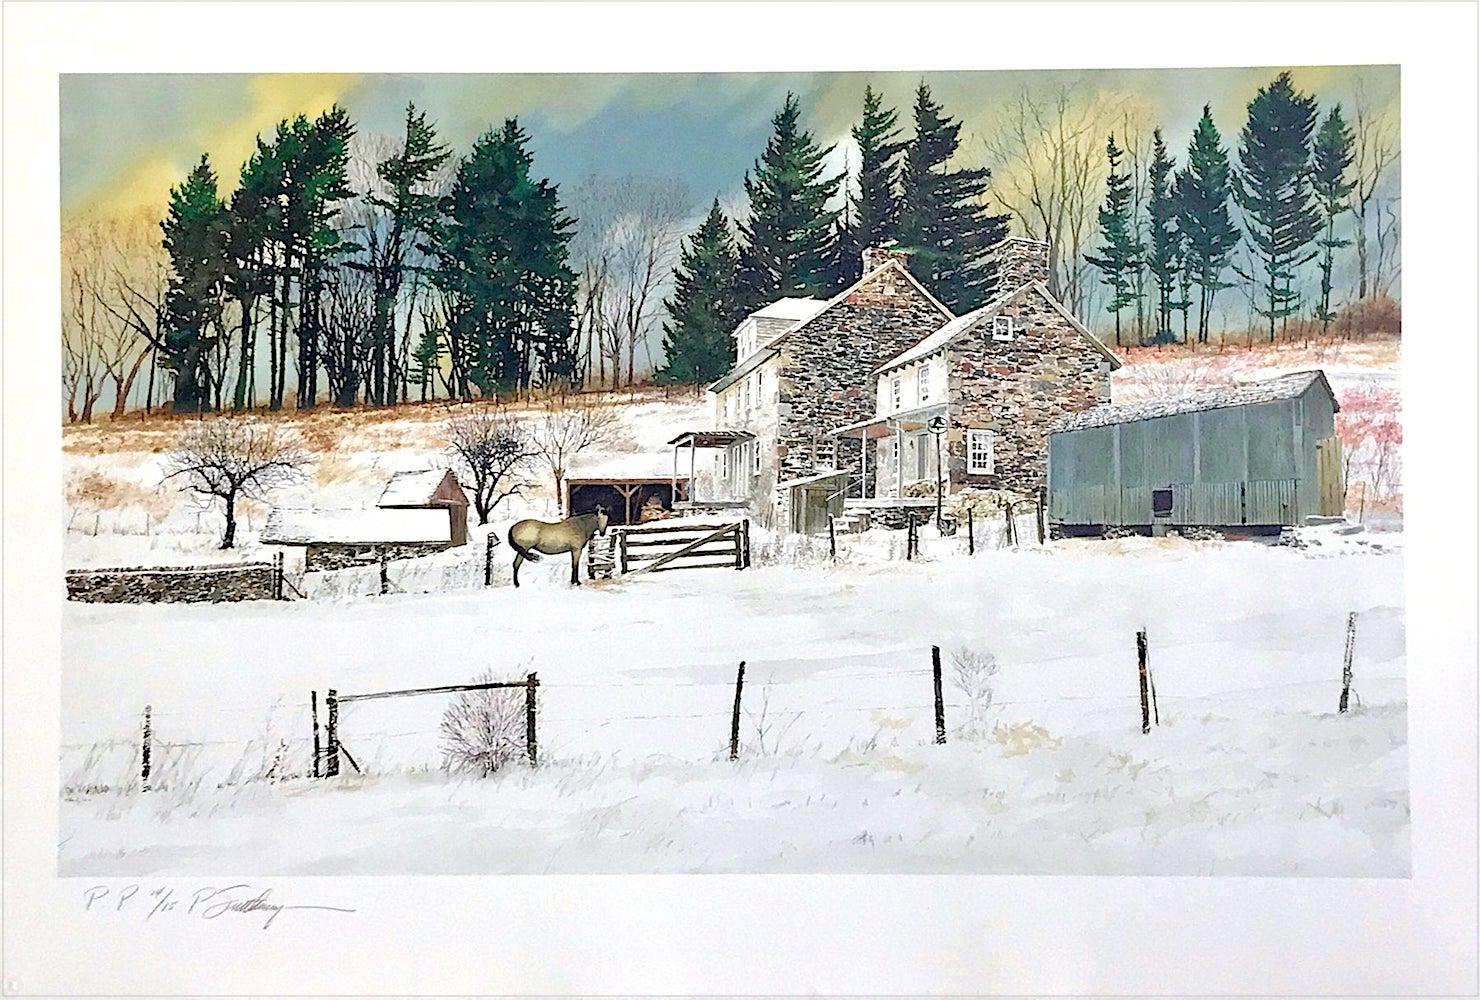 LITTLEWOODS Signed Lithograph, Historic Stone Farmhouse, Bucks County Landscape - Realist Print by Peter Sculthorpe